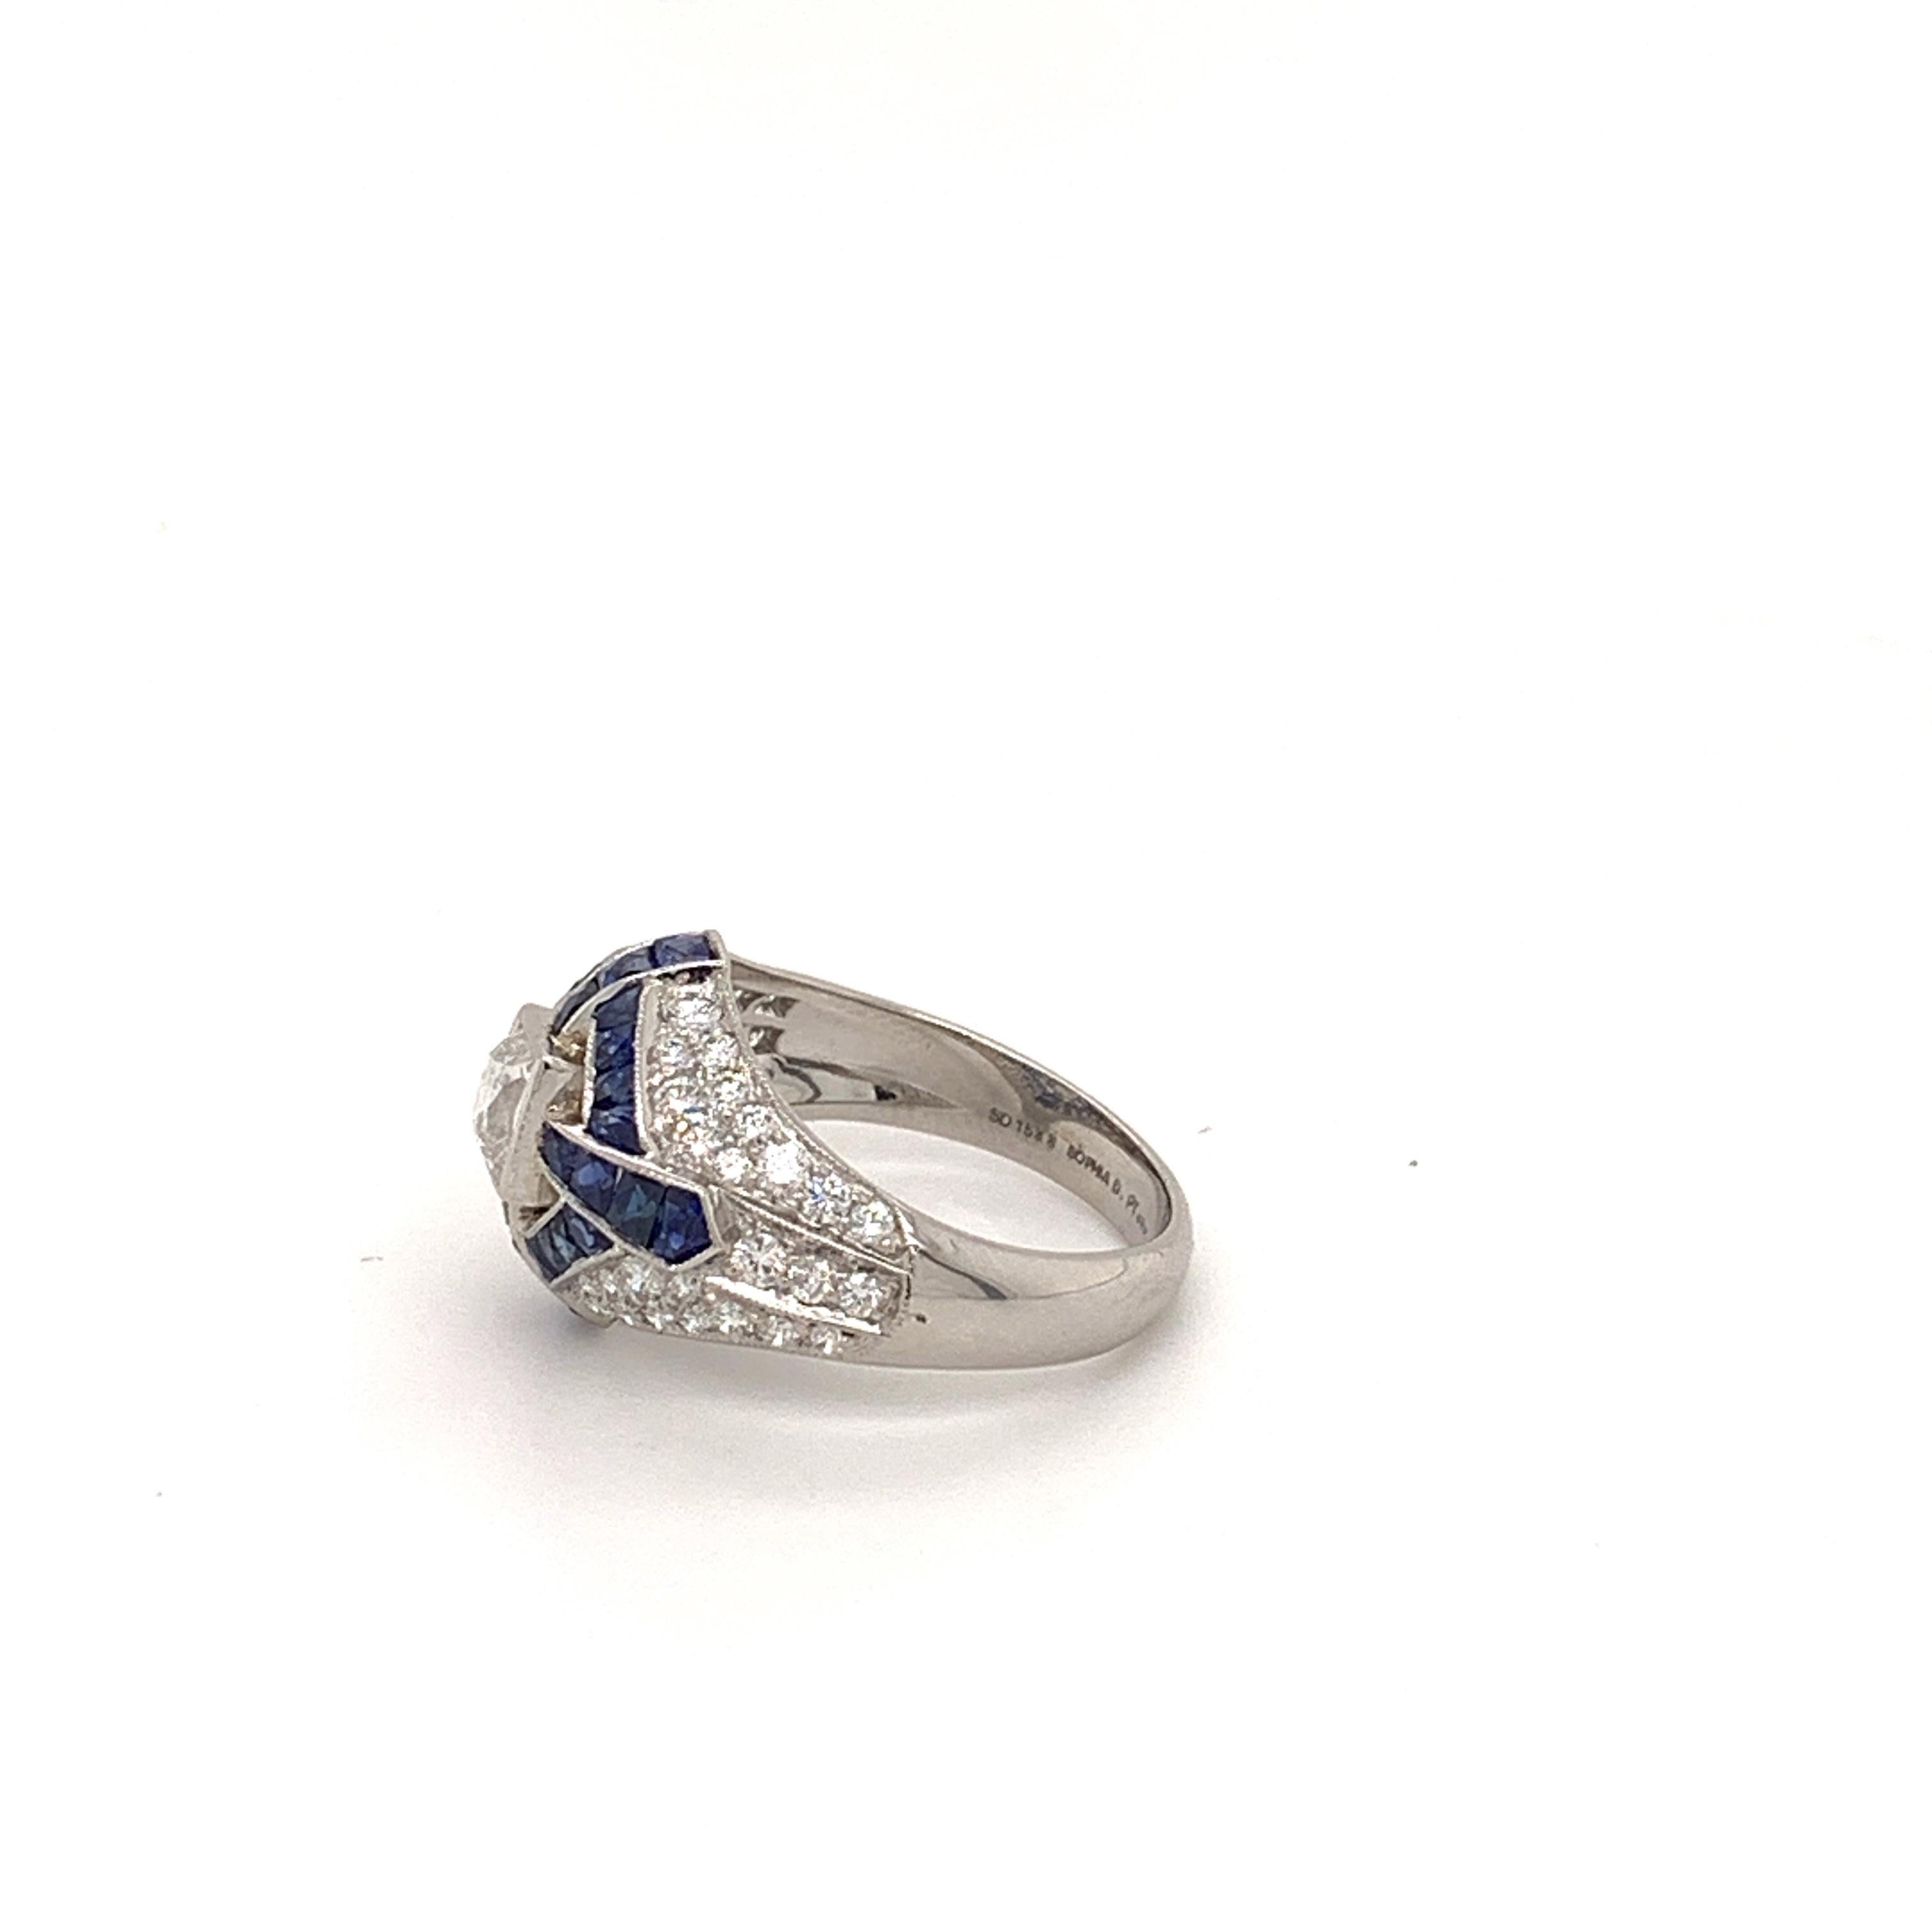 Art deco inspired ring that features 2.60 carat blue sapphire surrounded with 1.29 carats of diamond. 

Sophia D by Joseph Dardashti LTD has been known worldwide for 35 years and are inspired by classic Art Deco design that merges with modern